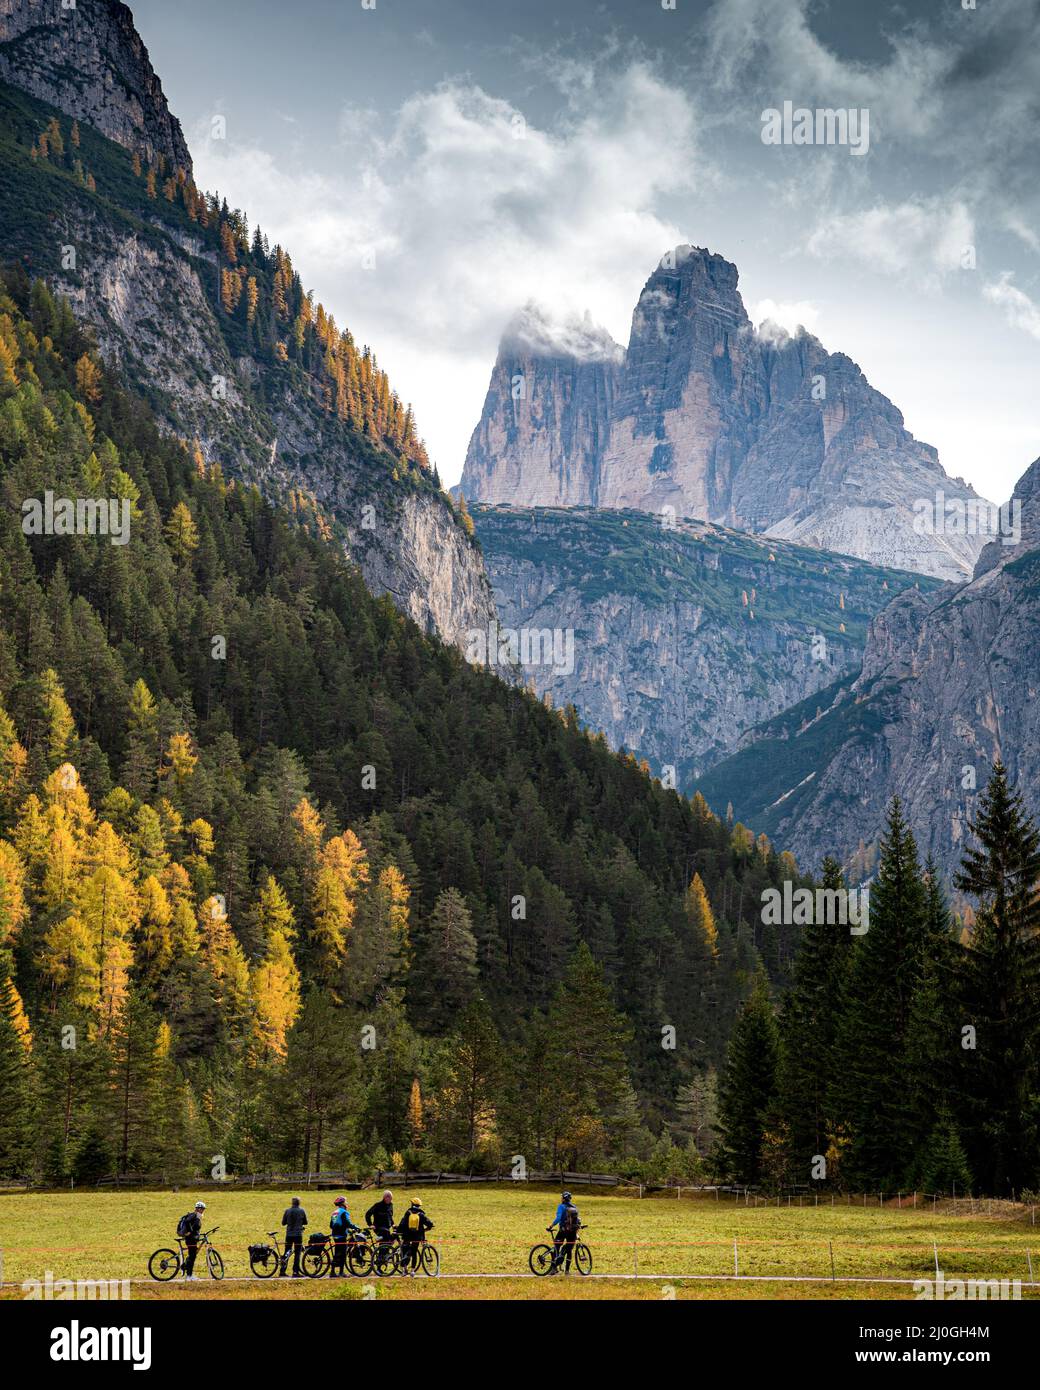 Bikers bicycling on a trail at the dolomites in the Italian Alps in Italy Stock Photo